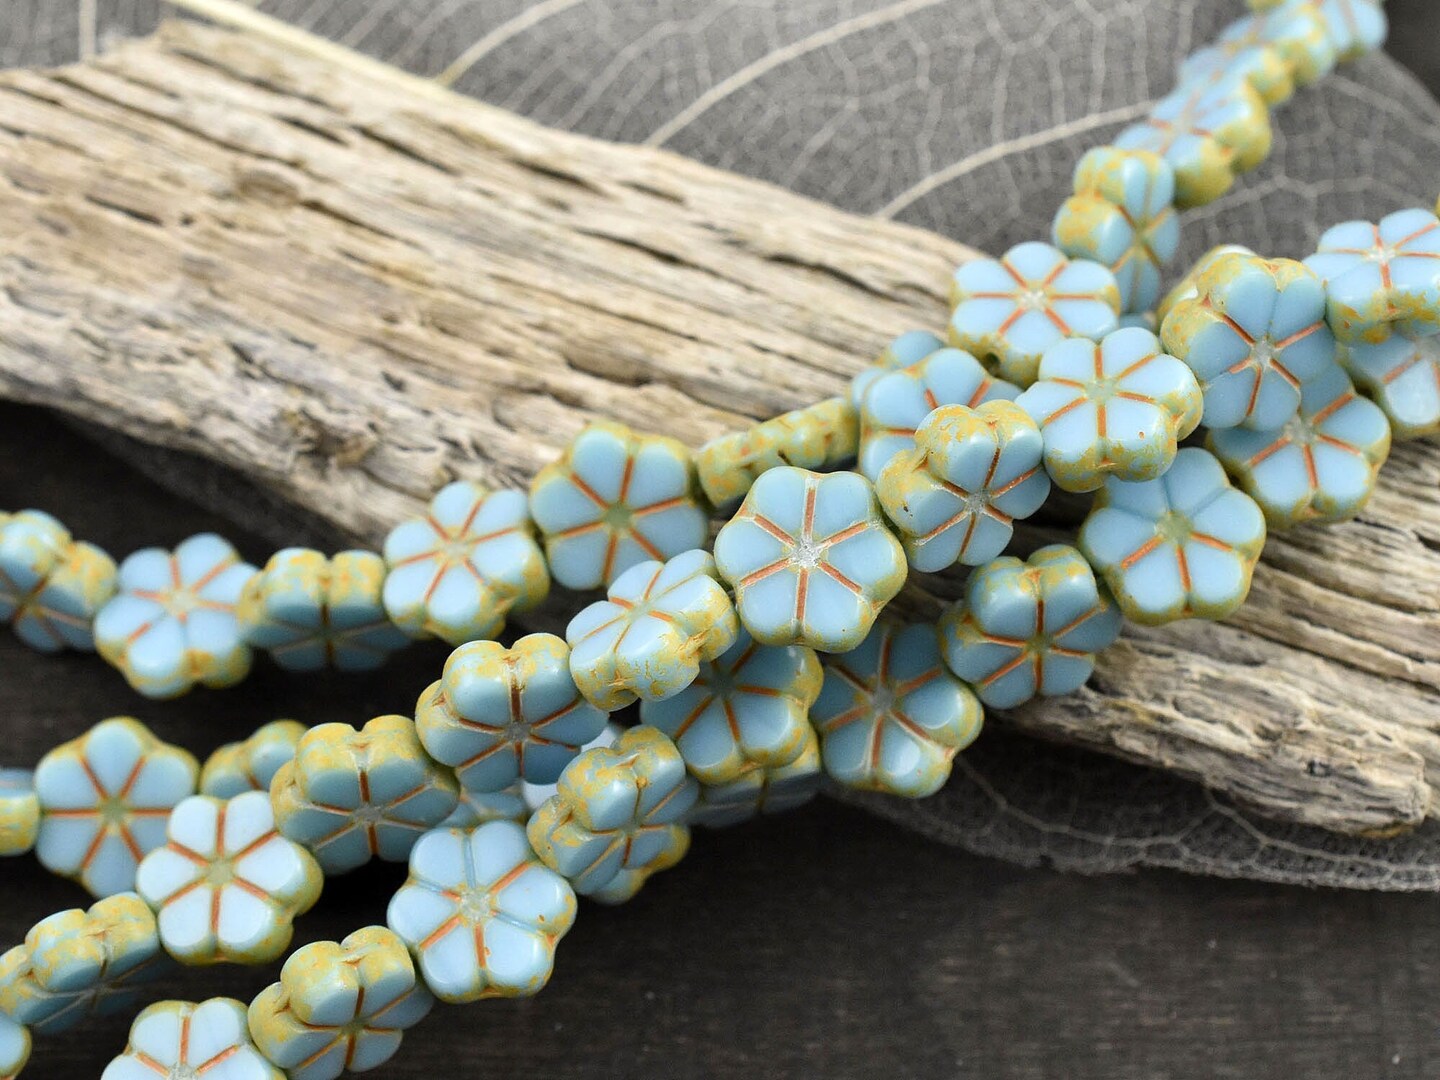 *15* 10mm Robins Egg Blue Picasso Table Cut Daisy Flower Beads